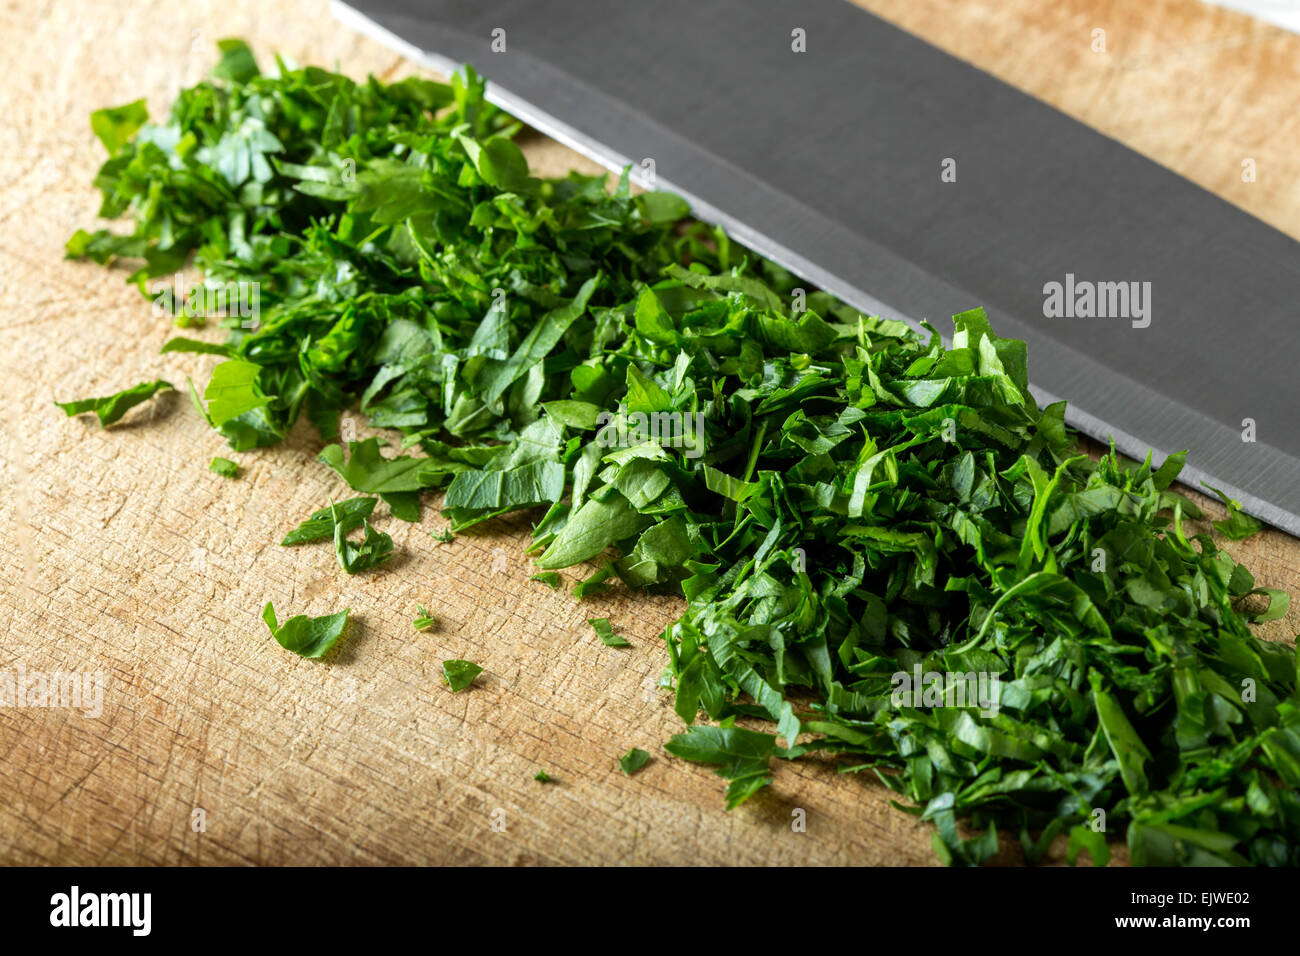 Chopped parsley leaf with a knife on a wooden table Stock Photo